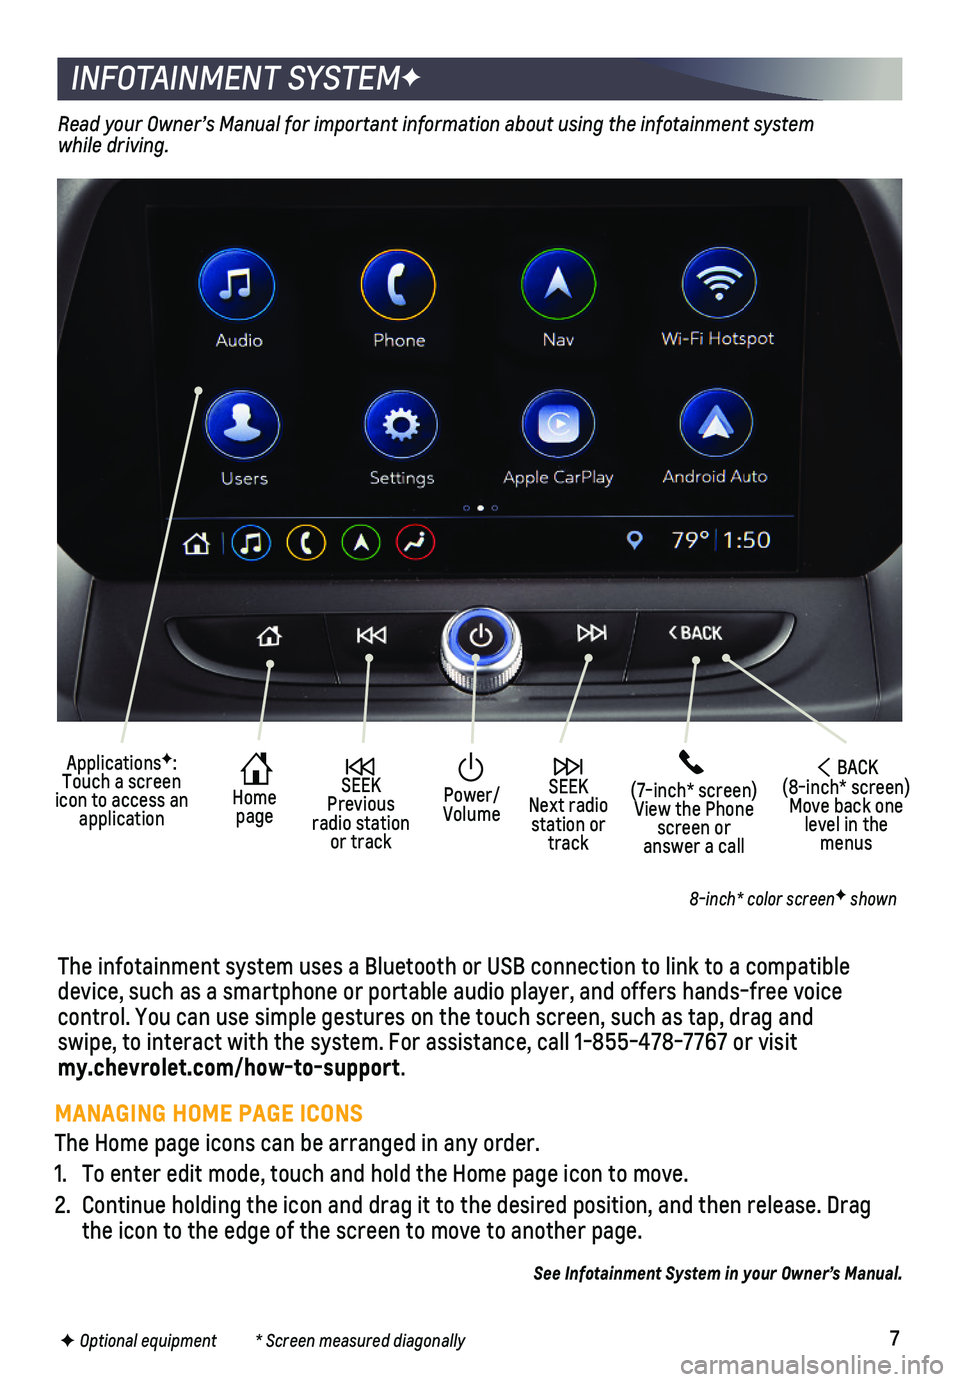 CHEVROLET CAMARO 2021  Get To Know Guide 7
INFOTAINMENT SYSTEMF
The infotainment system uses a Bluetooth or USB connection to link to a \
compatible device, such as a smartphone or portable audio player, and offers hands-\
free voice  
contr